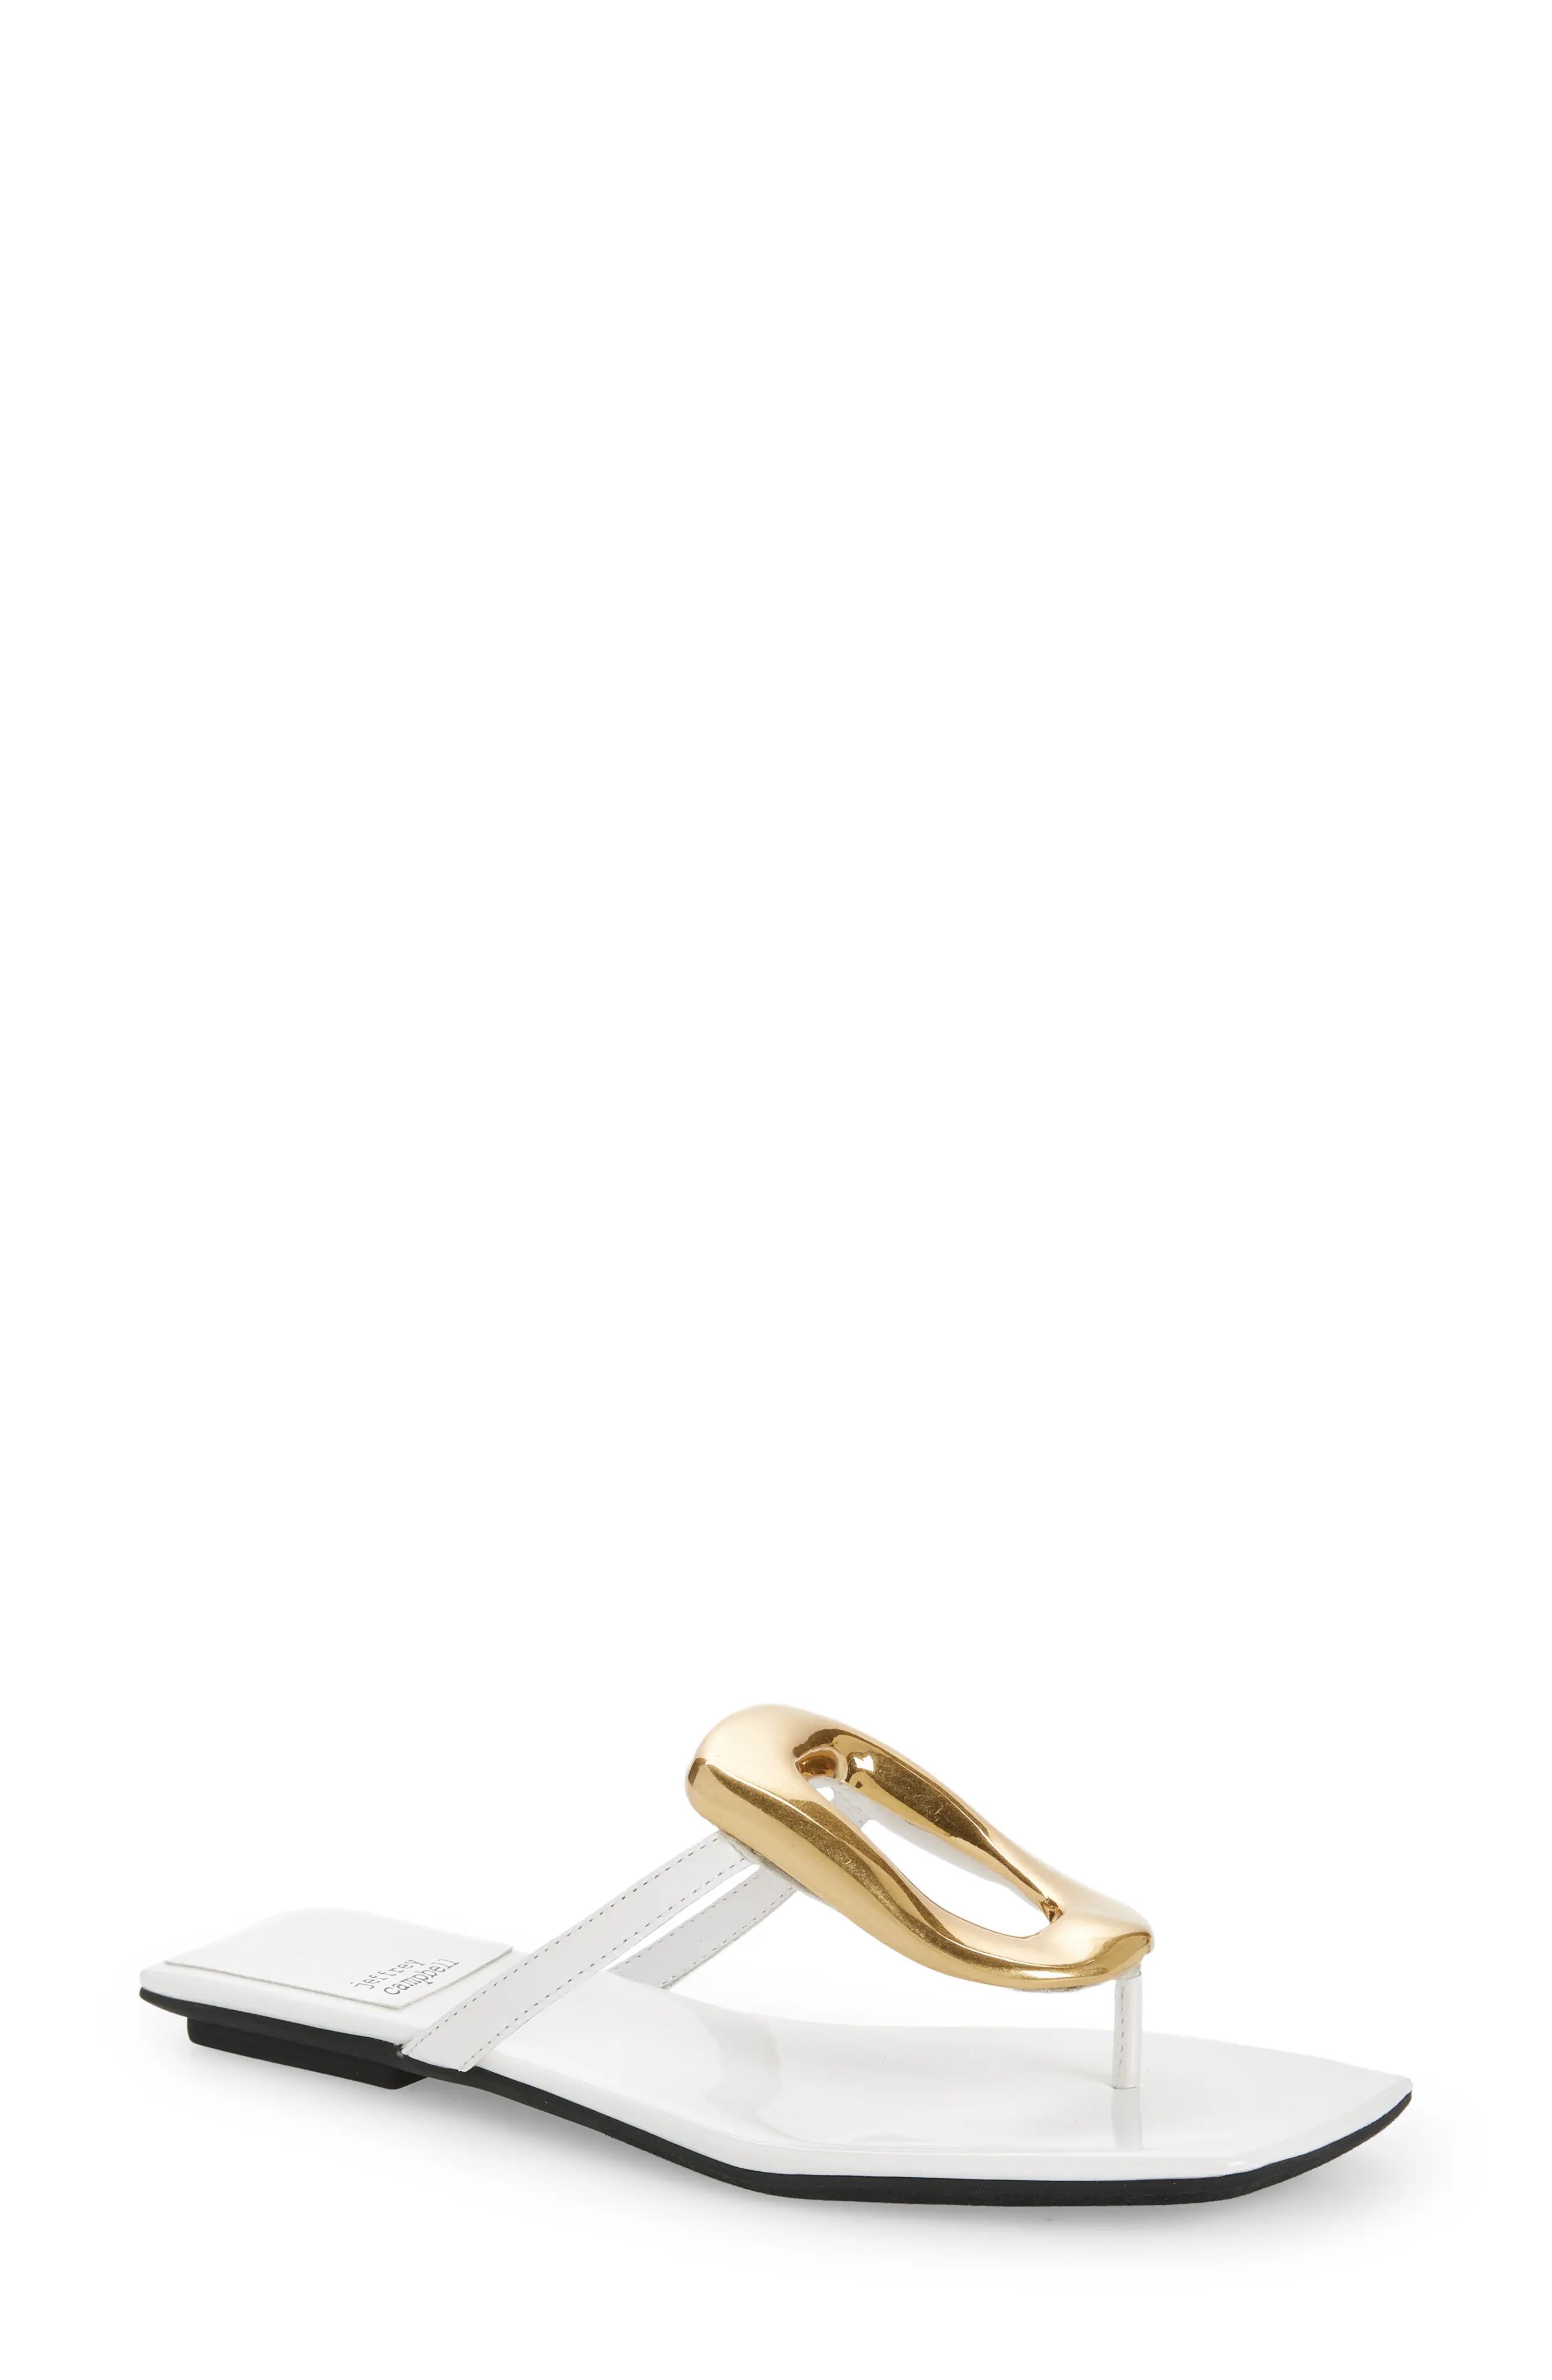 Jeffrey Campbell Linques 2 Flip Flop in White Patent Gold at Nordstrom, Size 5 | Nordstrom